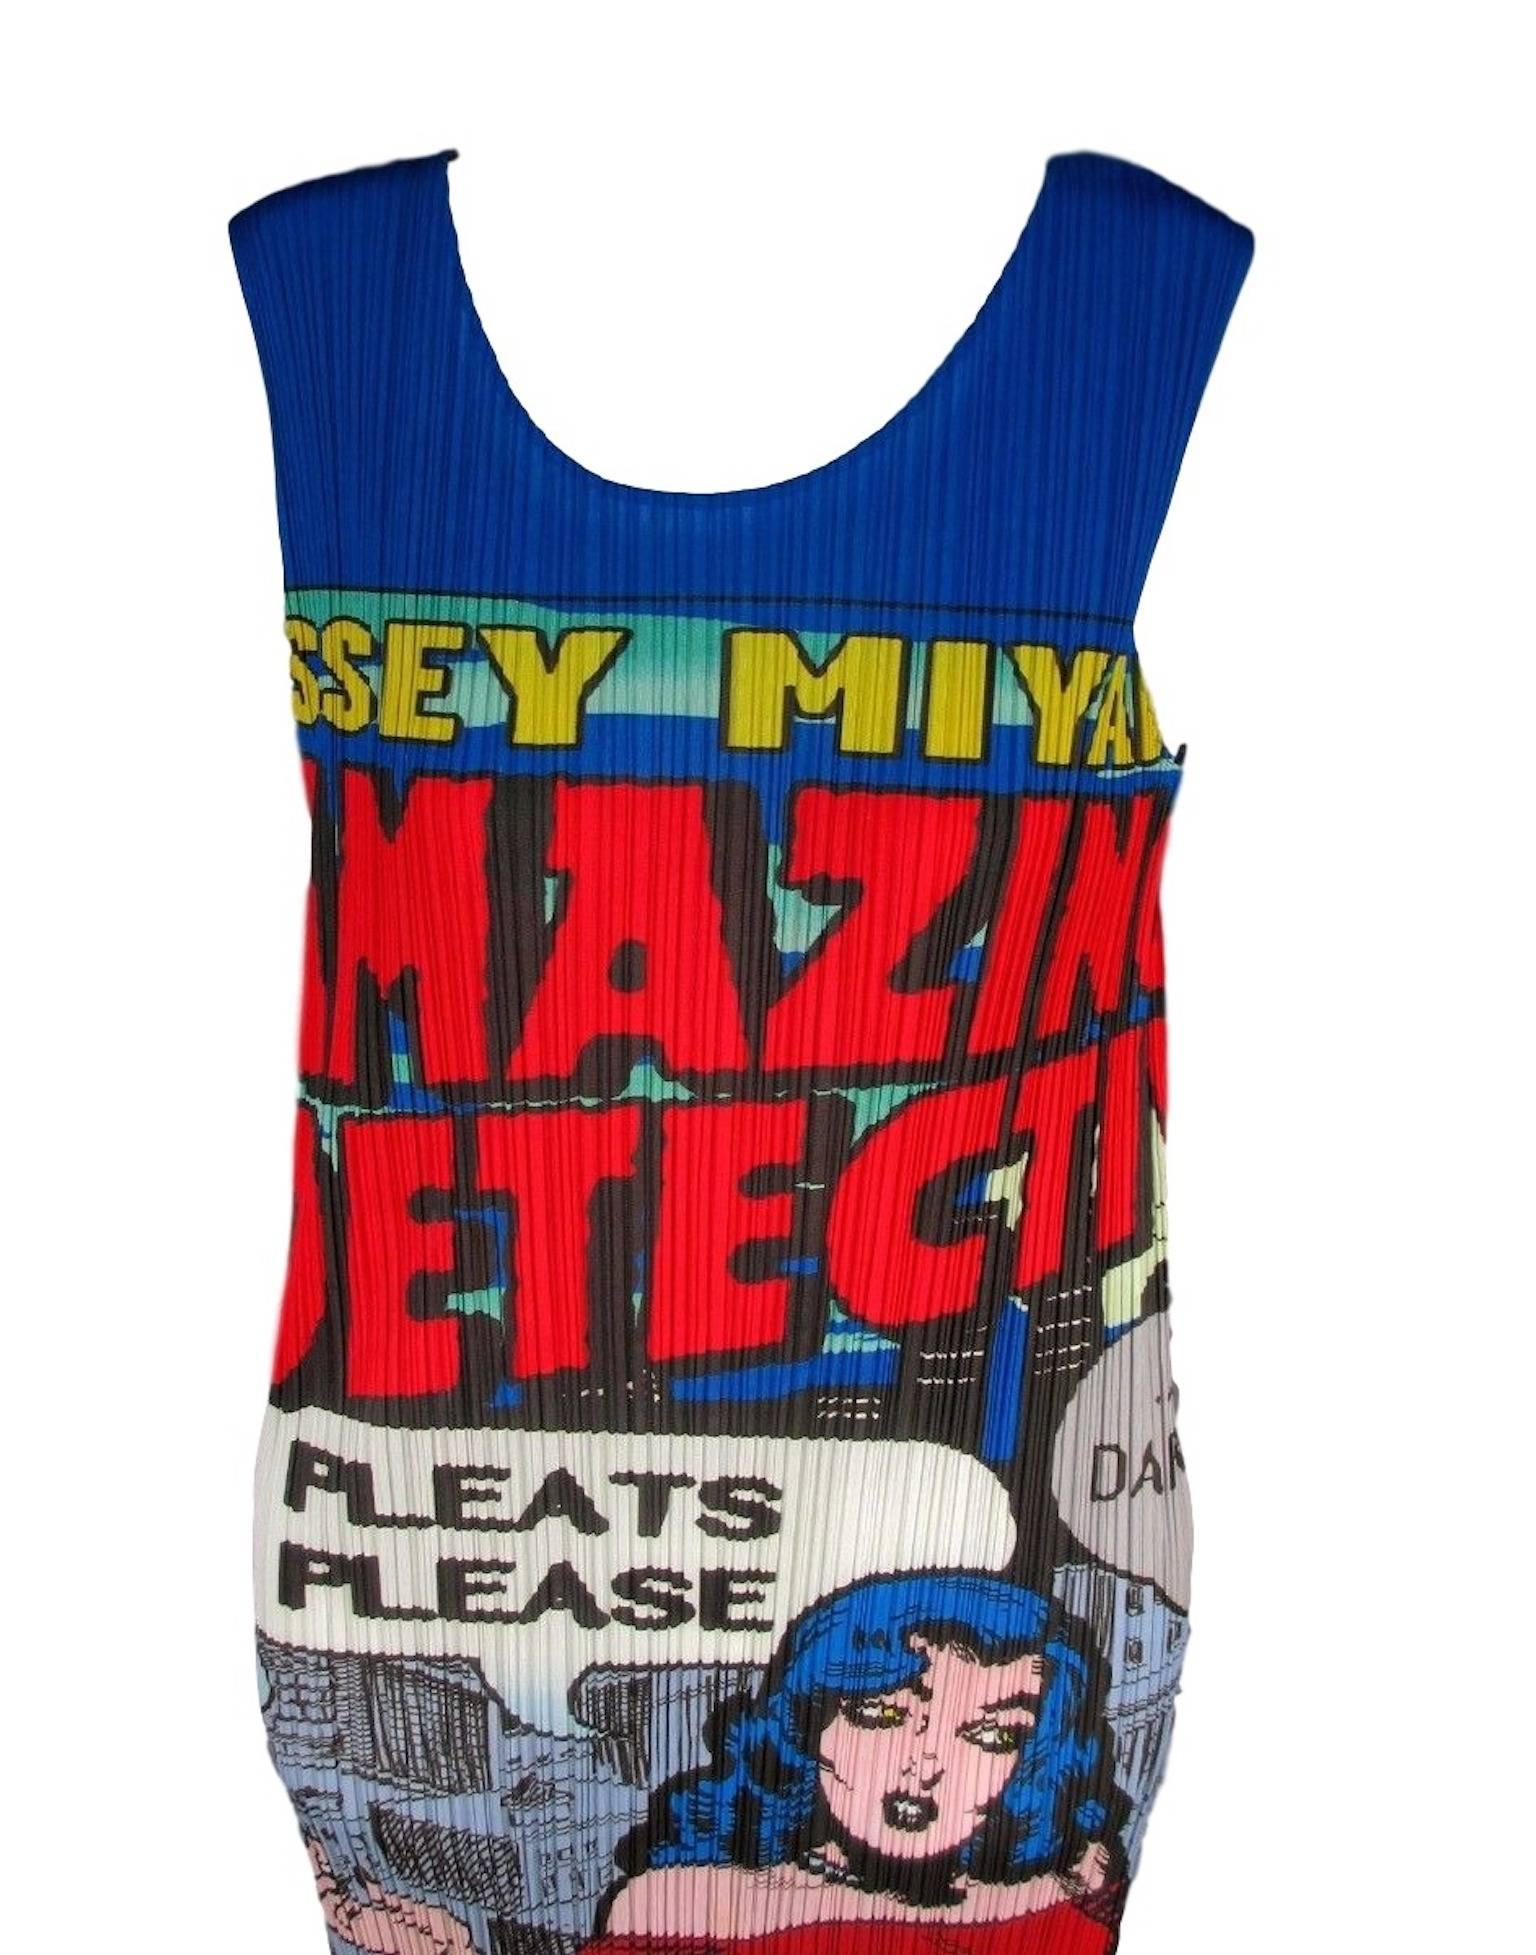 Issey Miyake Pleats Please Comic Book / Pop Art "Amazing Detective" print dress. Made from the micro pleated polyester used in all the pieces from this range, with ultra stretch. Mid to late 1990s.

In excellent condition.

Labelled a size